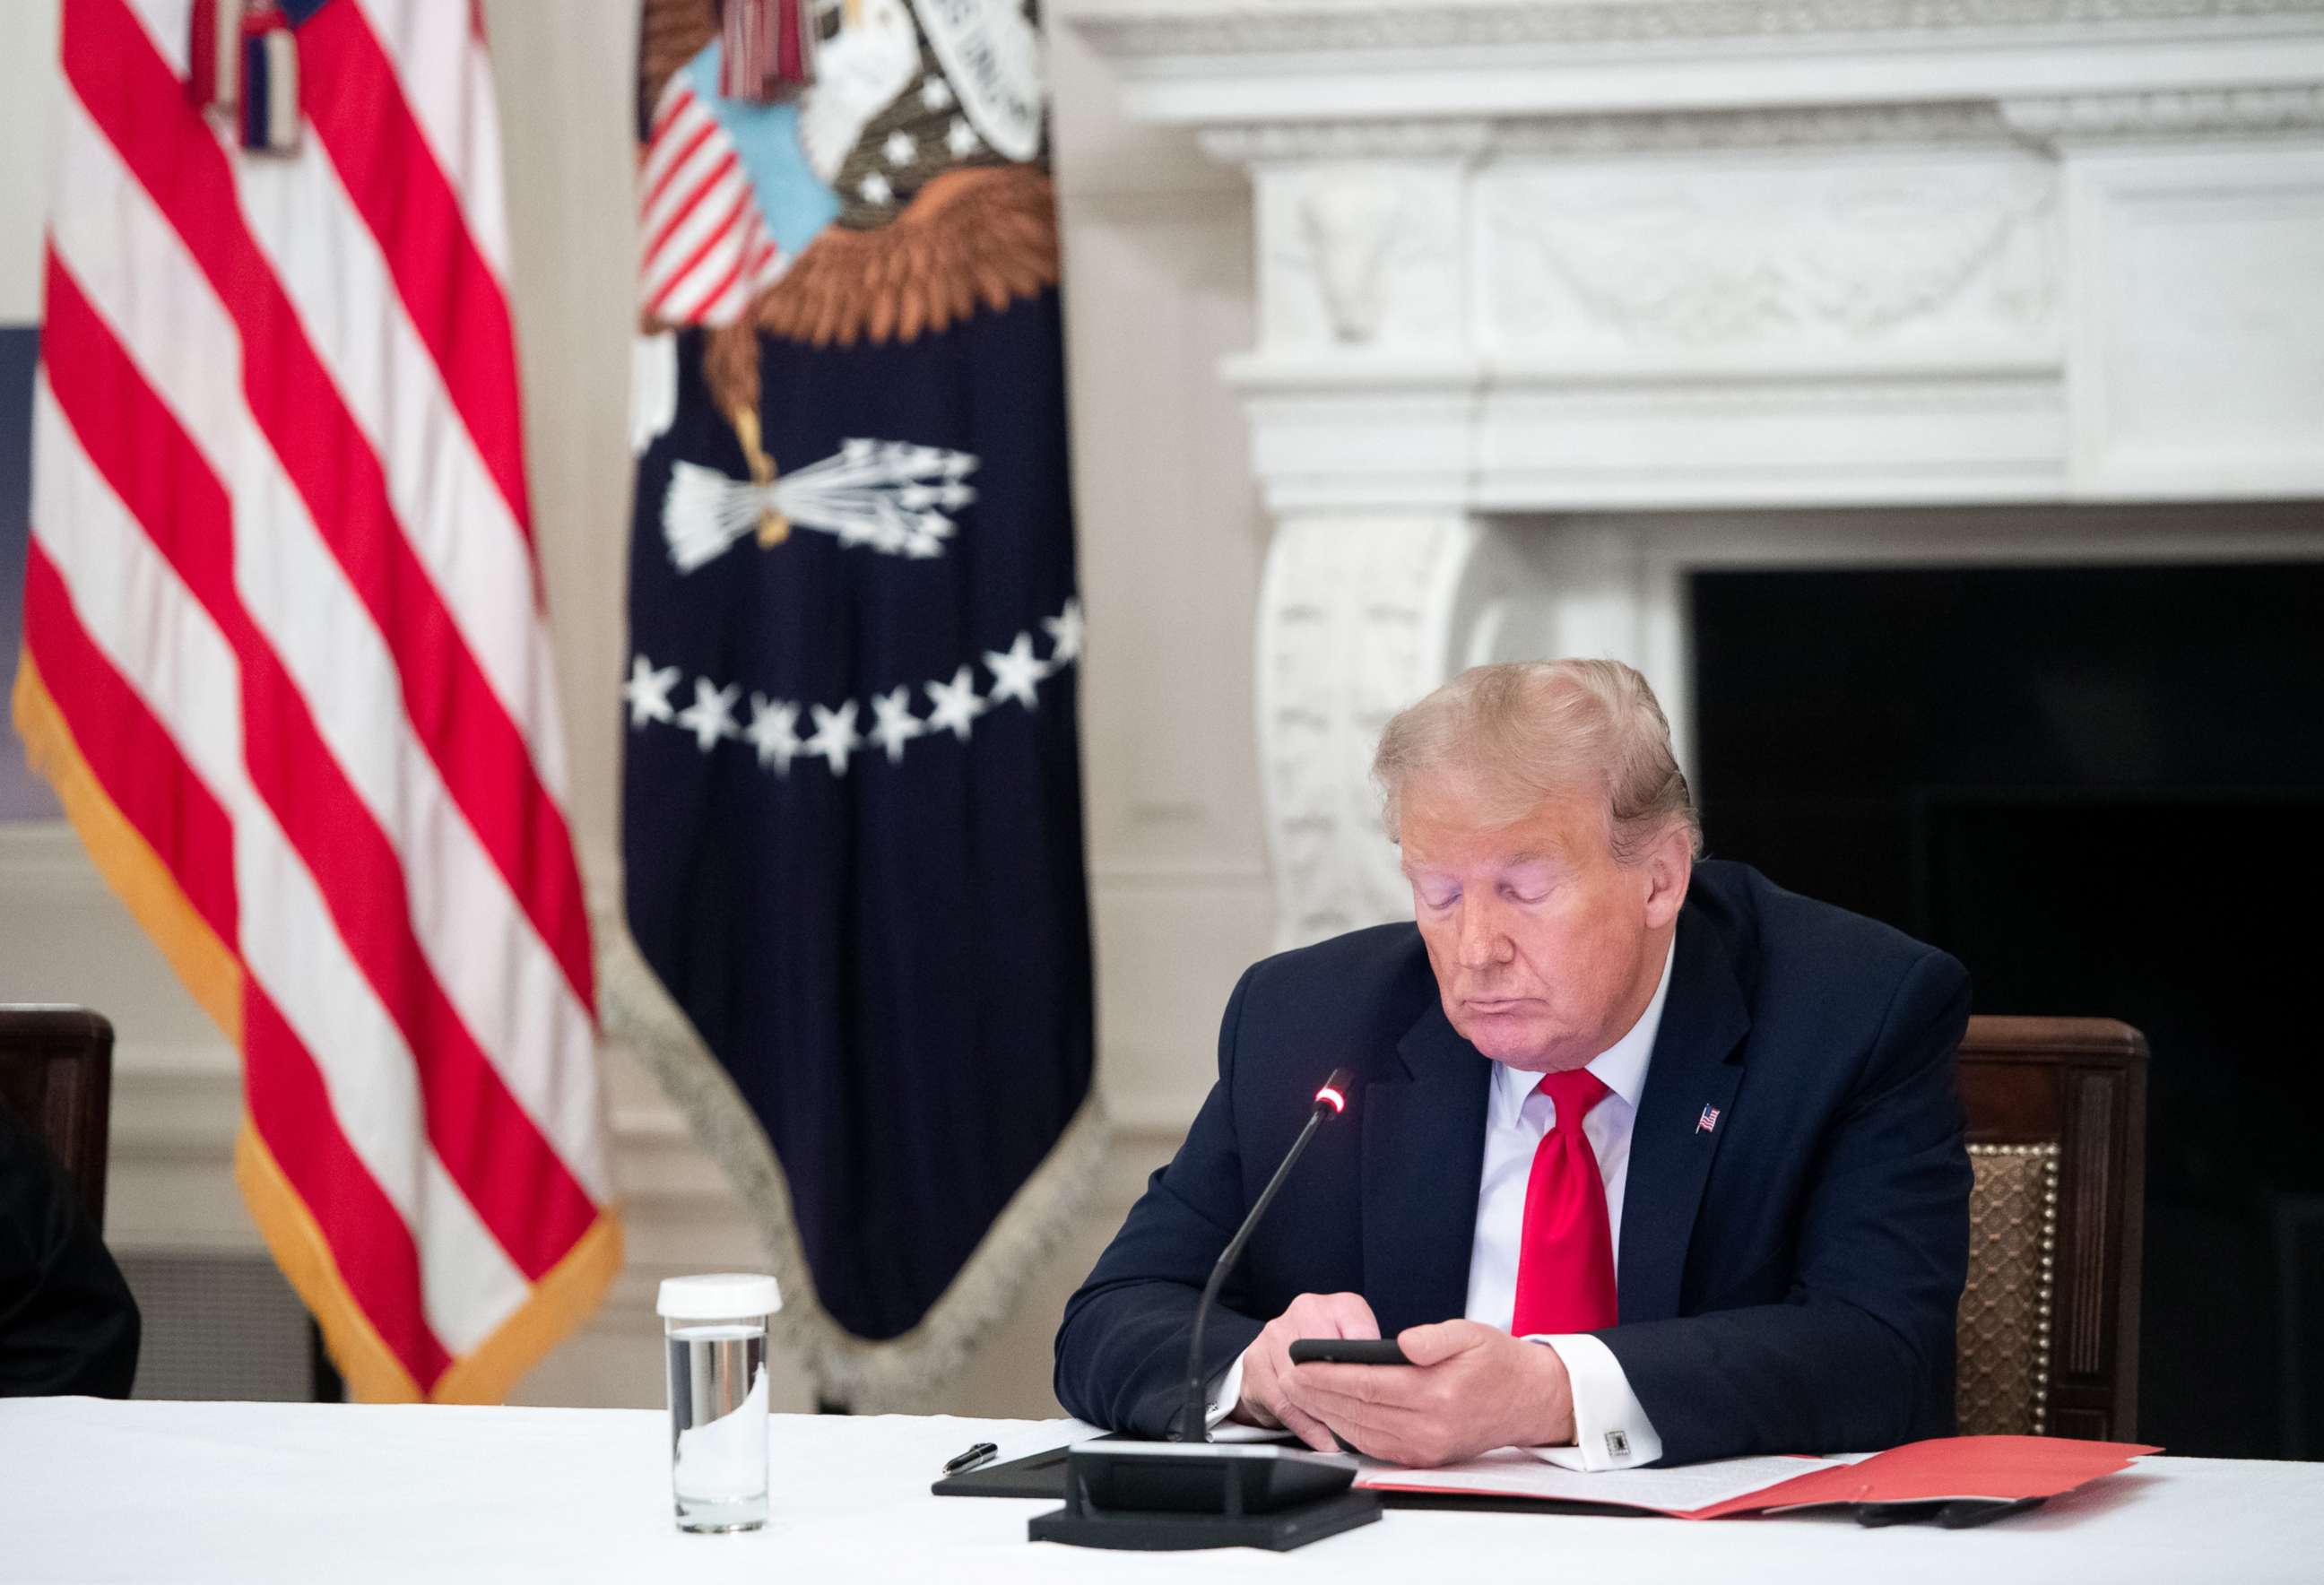 PHOTO: In this June 18, 2020, file photo, President Donald Trump uses his cellphone as he holds a meeting in the State Dining Room of the White House in Washington, DC.